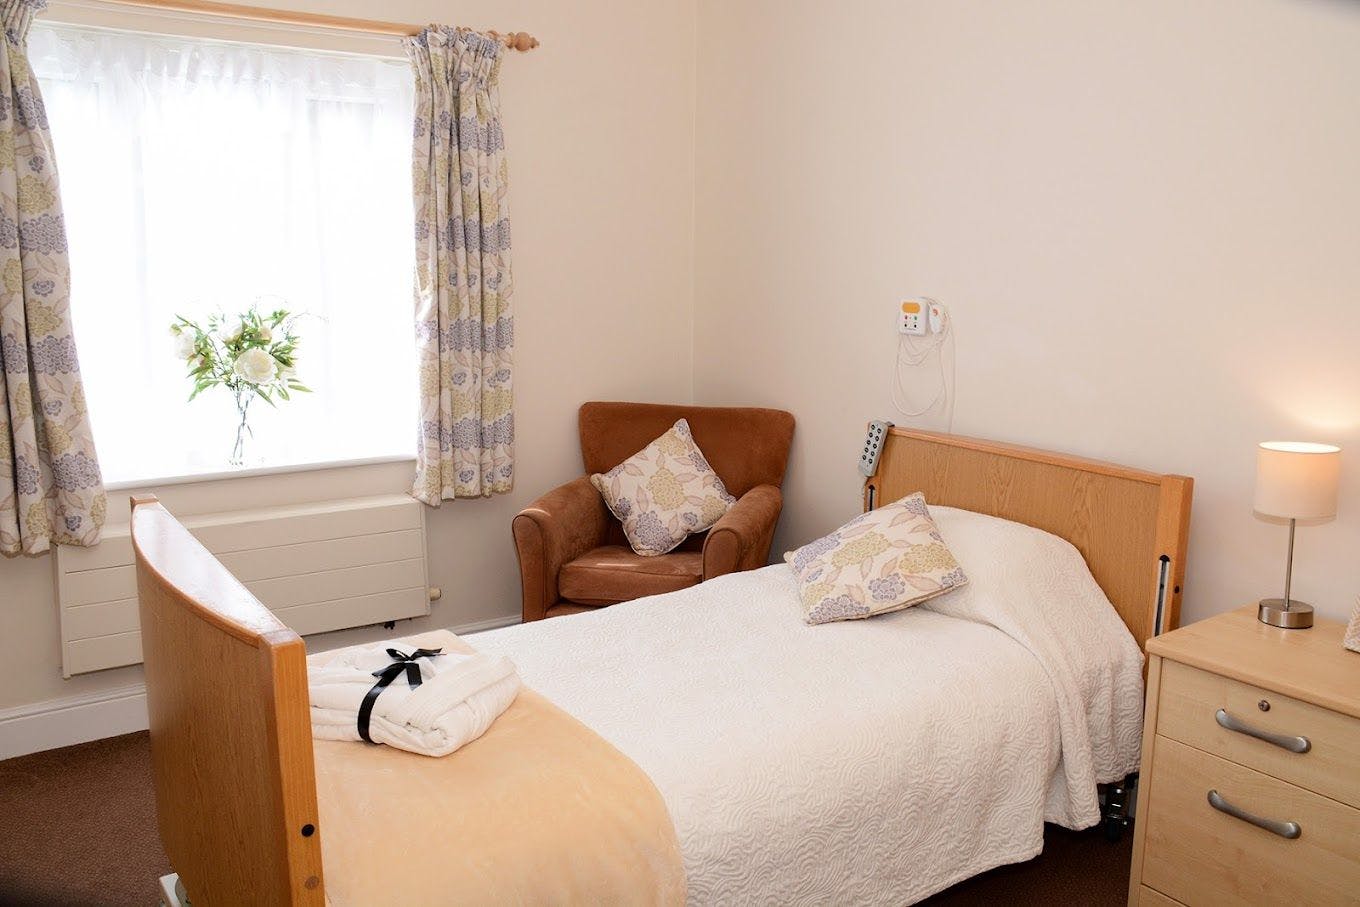 Bedroom of Talbot View care home in Bournemouth, Hampshire